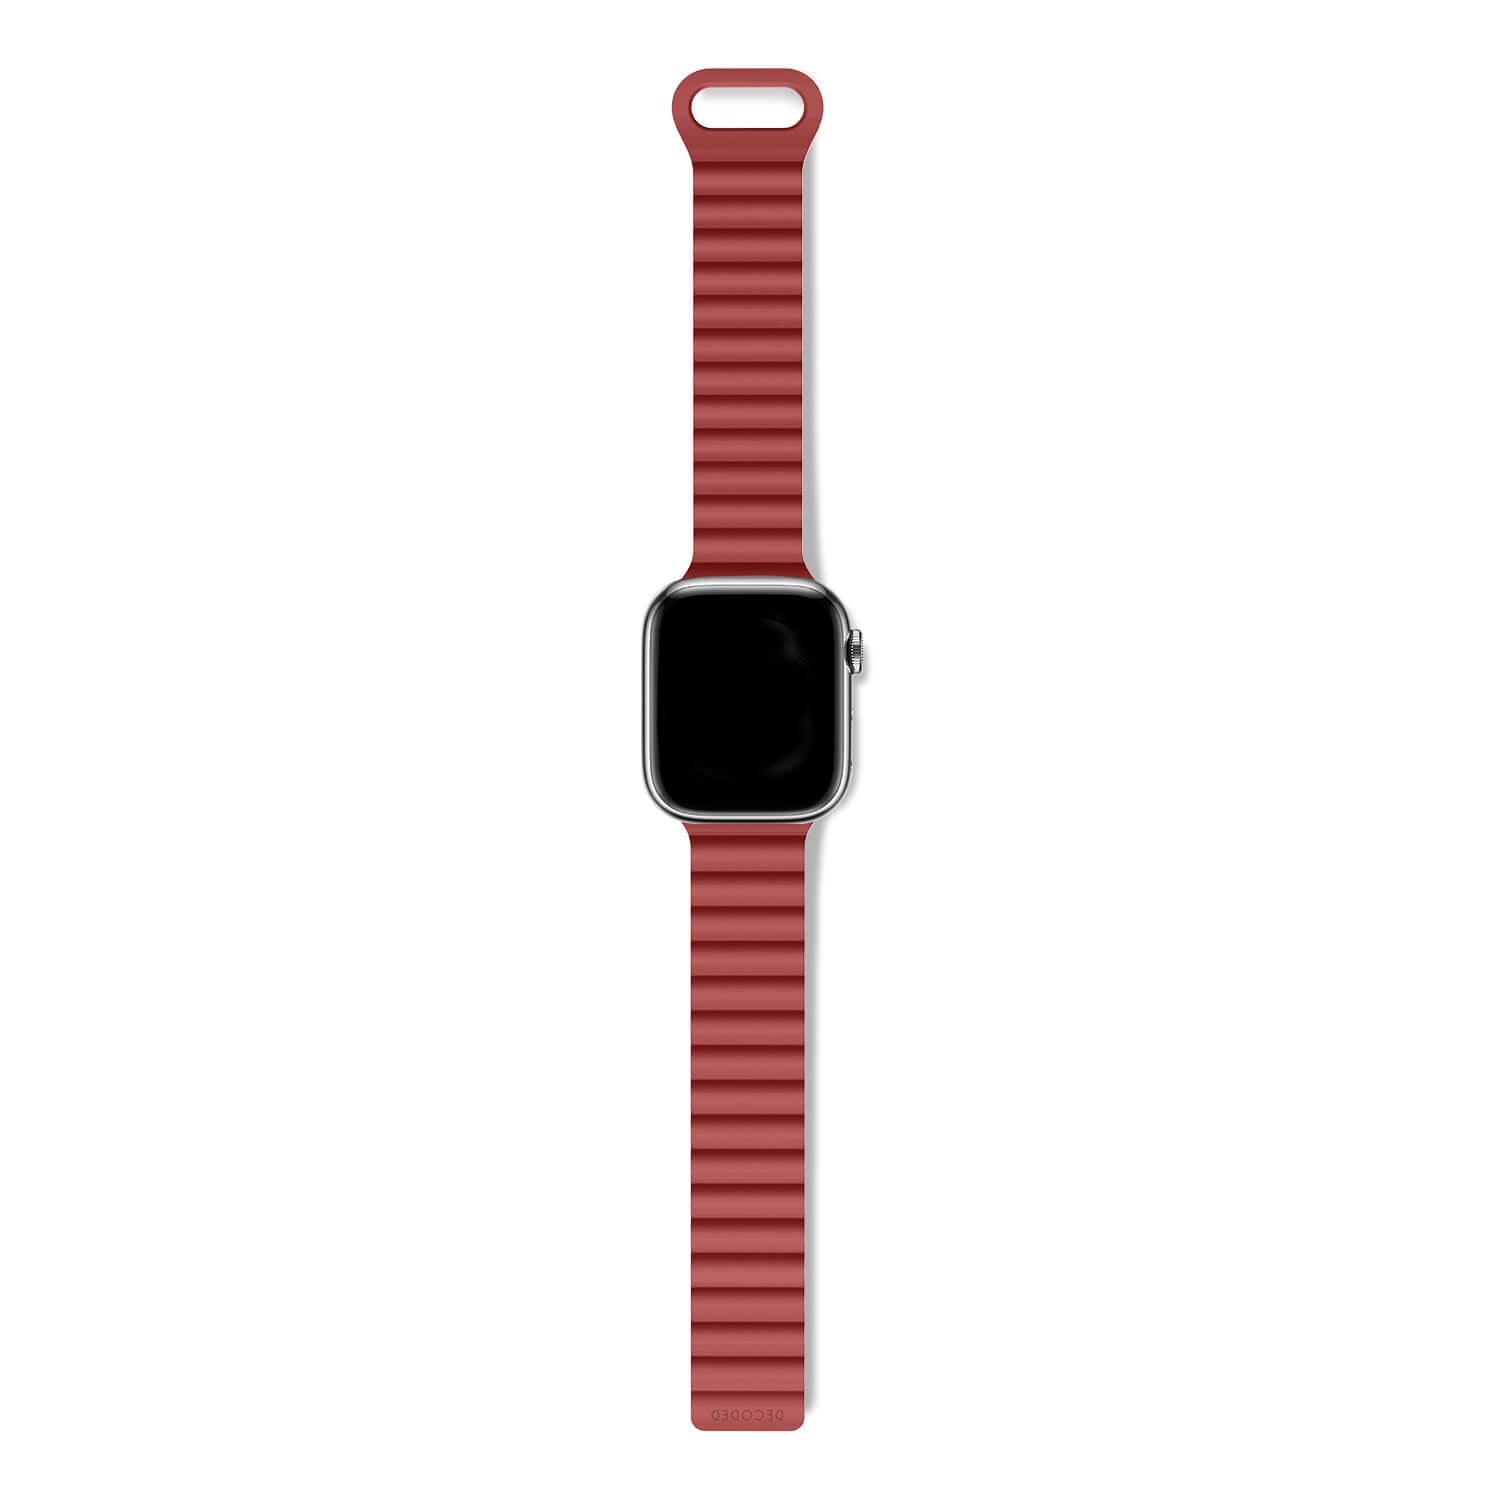 Silicone Traction Loop Strap Apple Watch SE 40mm, Astro Dust